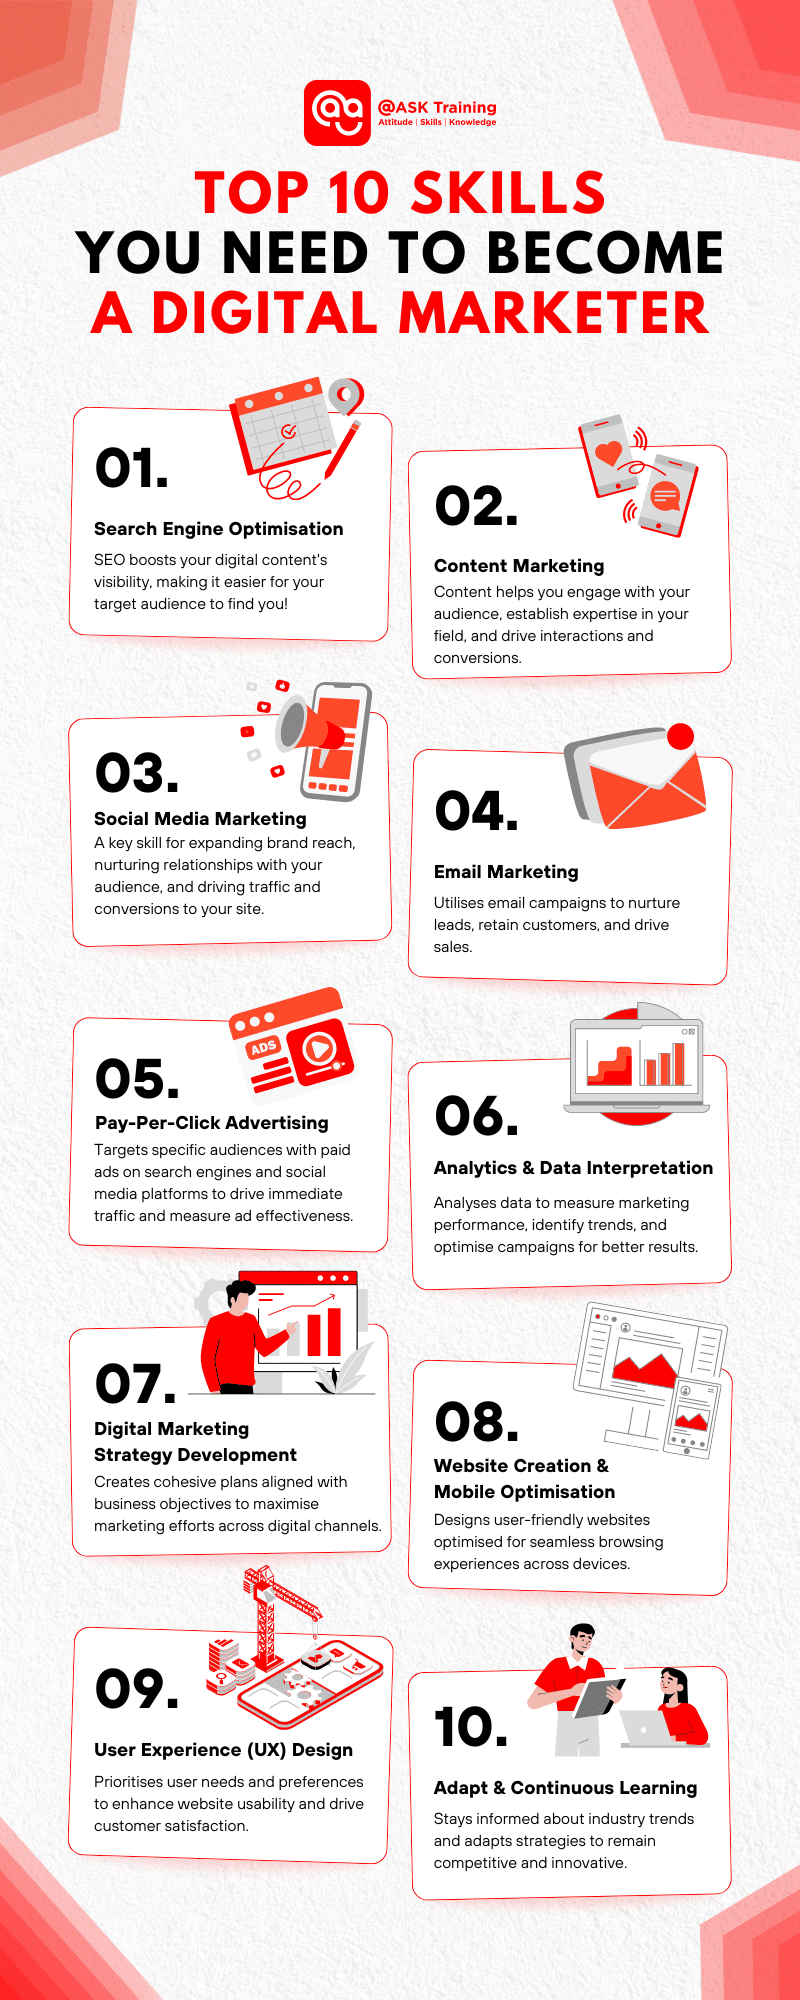 Infographic on the Top 10 Skills You Need to Become a Digital Marketer